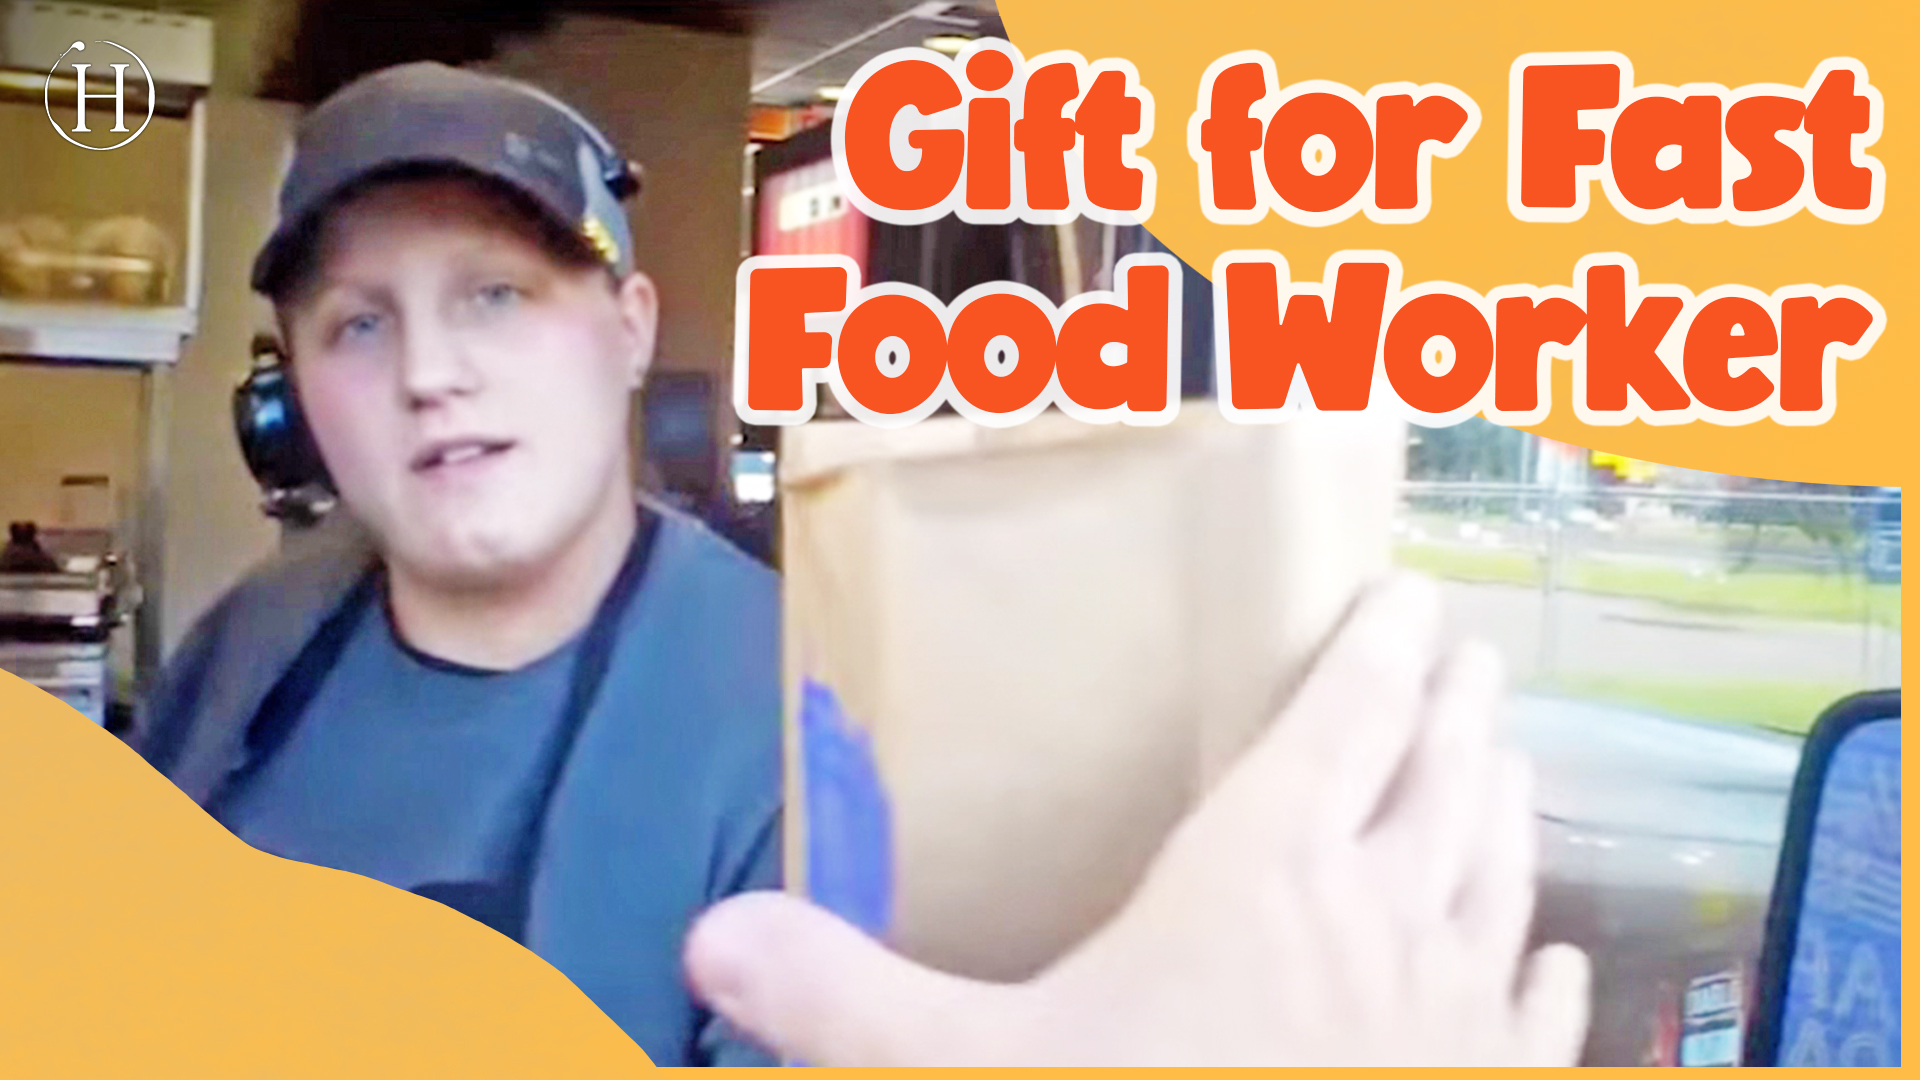 Soldier Gives Fast Food Worker Big Tip | Humanity Life